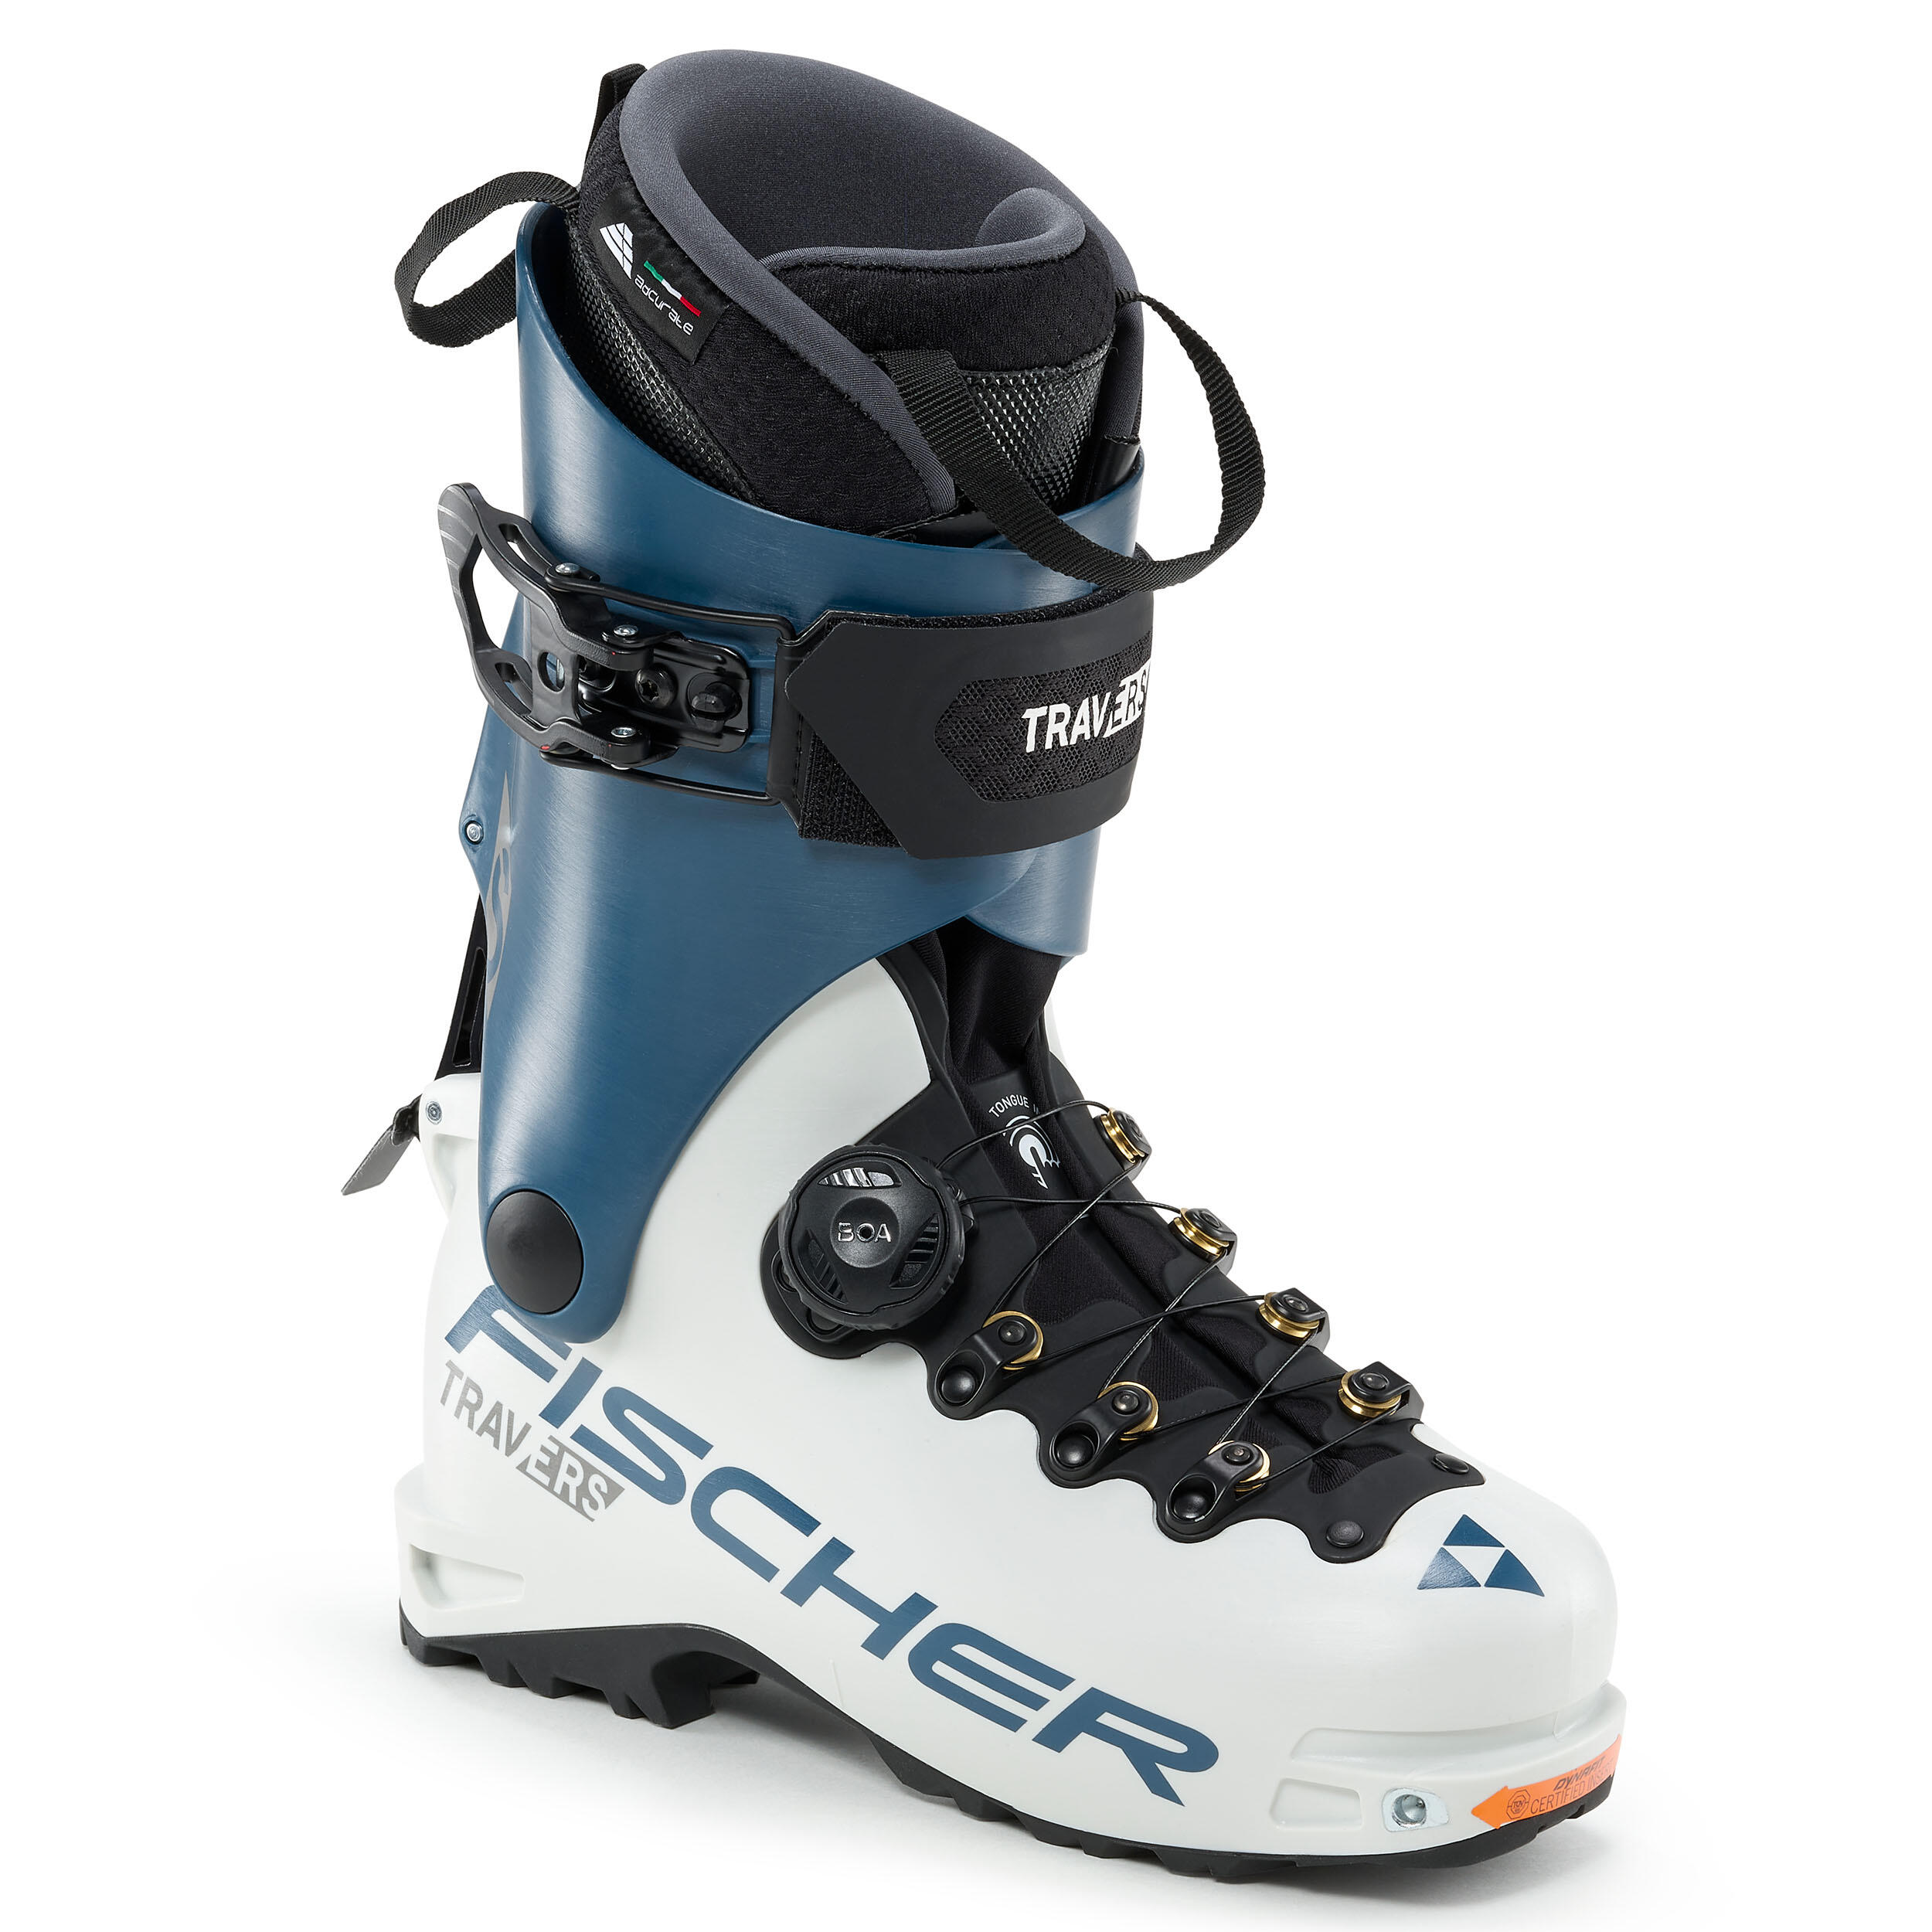 Photos - Ski Boots Fischer Women’s Cross-country Skiing Boots -  Travers Ts 